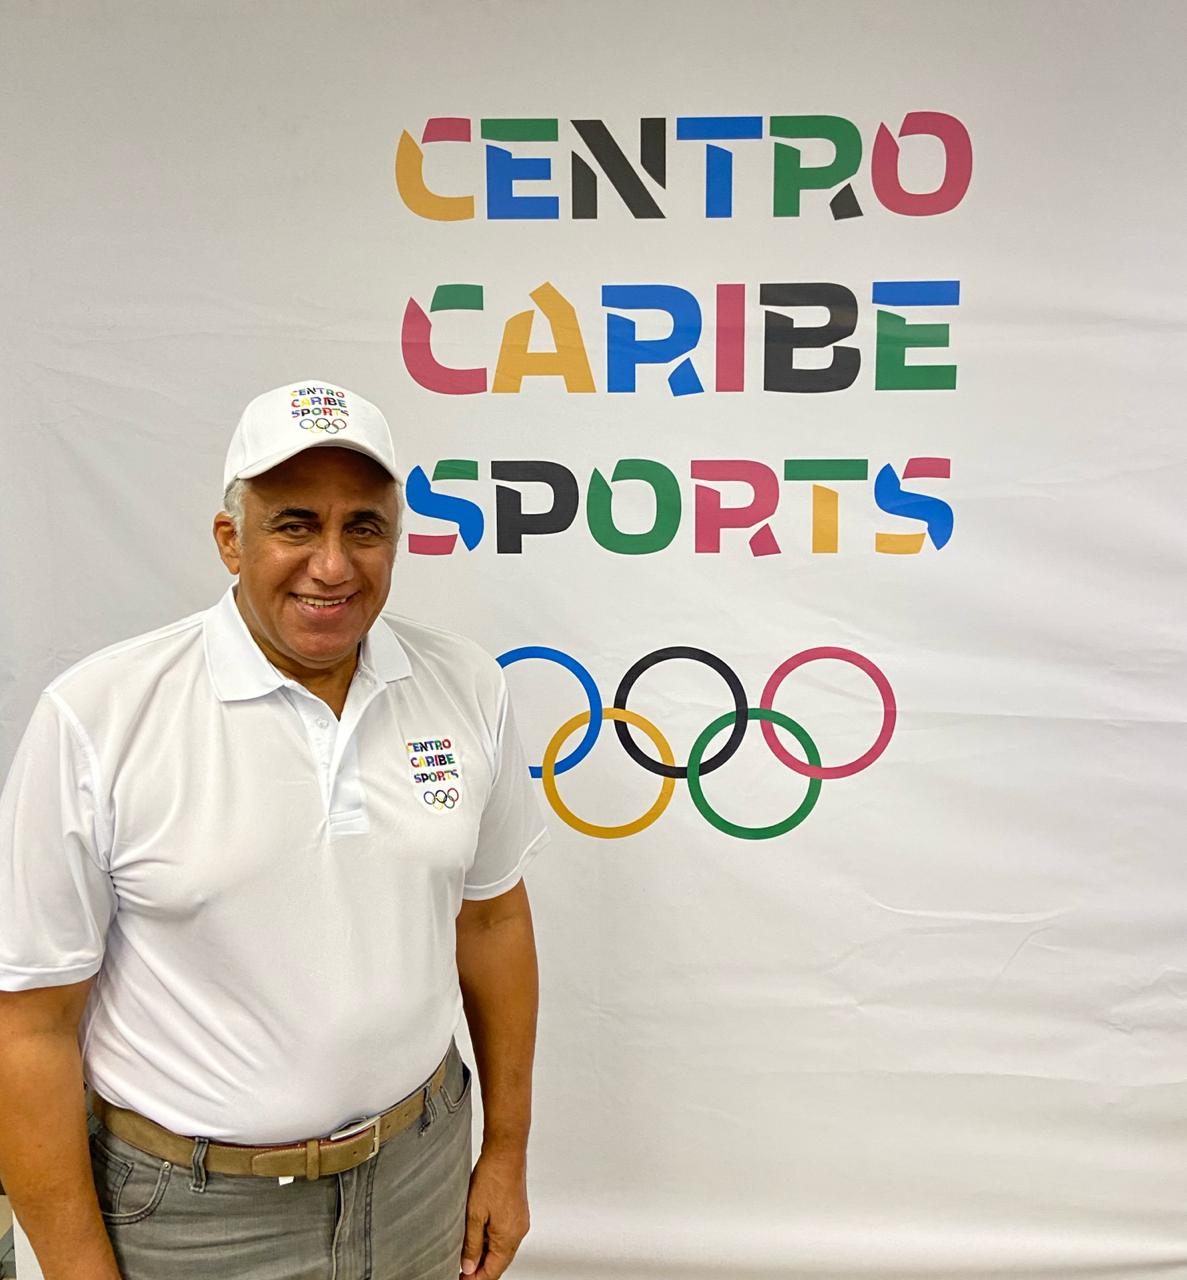 Central American and Caribbean Sports Organisation renamed Centro Caribe Sports